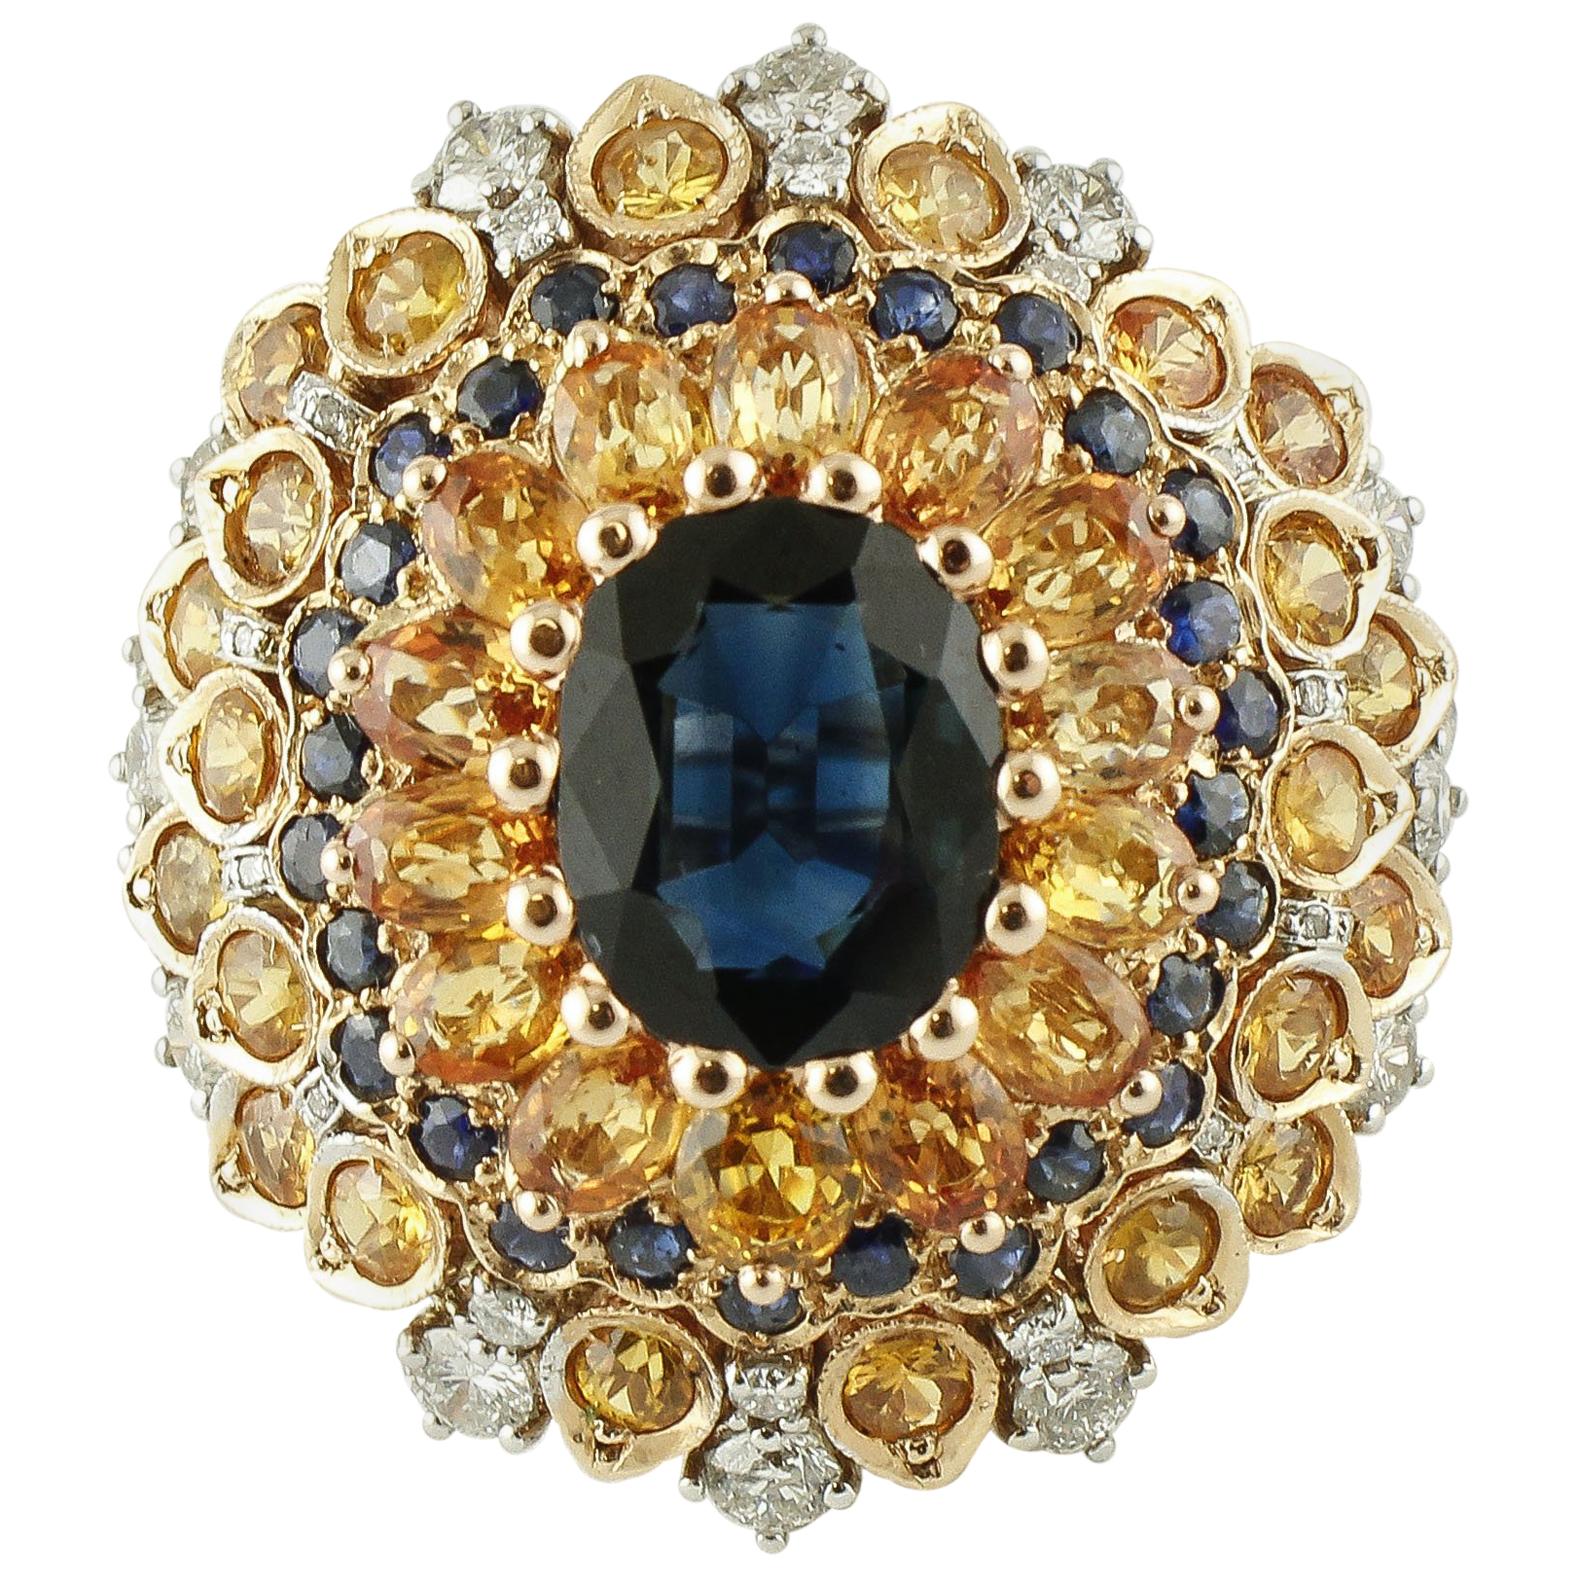 4ct Central Blue Sapphire, Blue and Yellow Sapphires, Diamonds, Rose Gold Ring